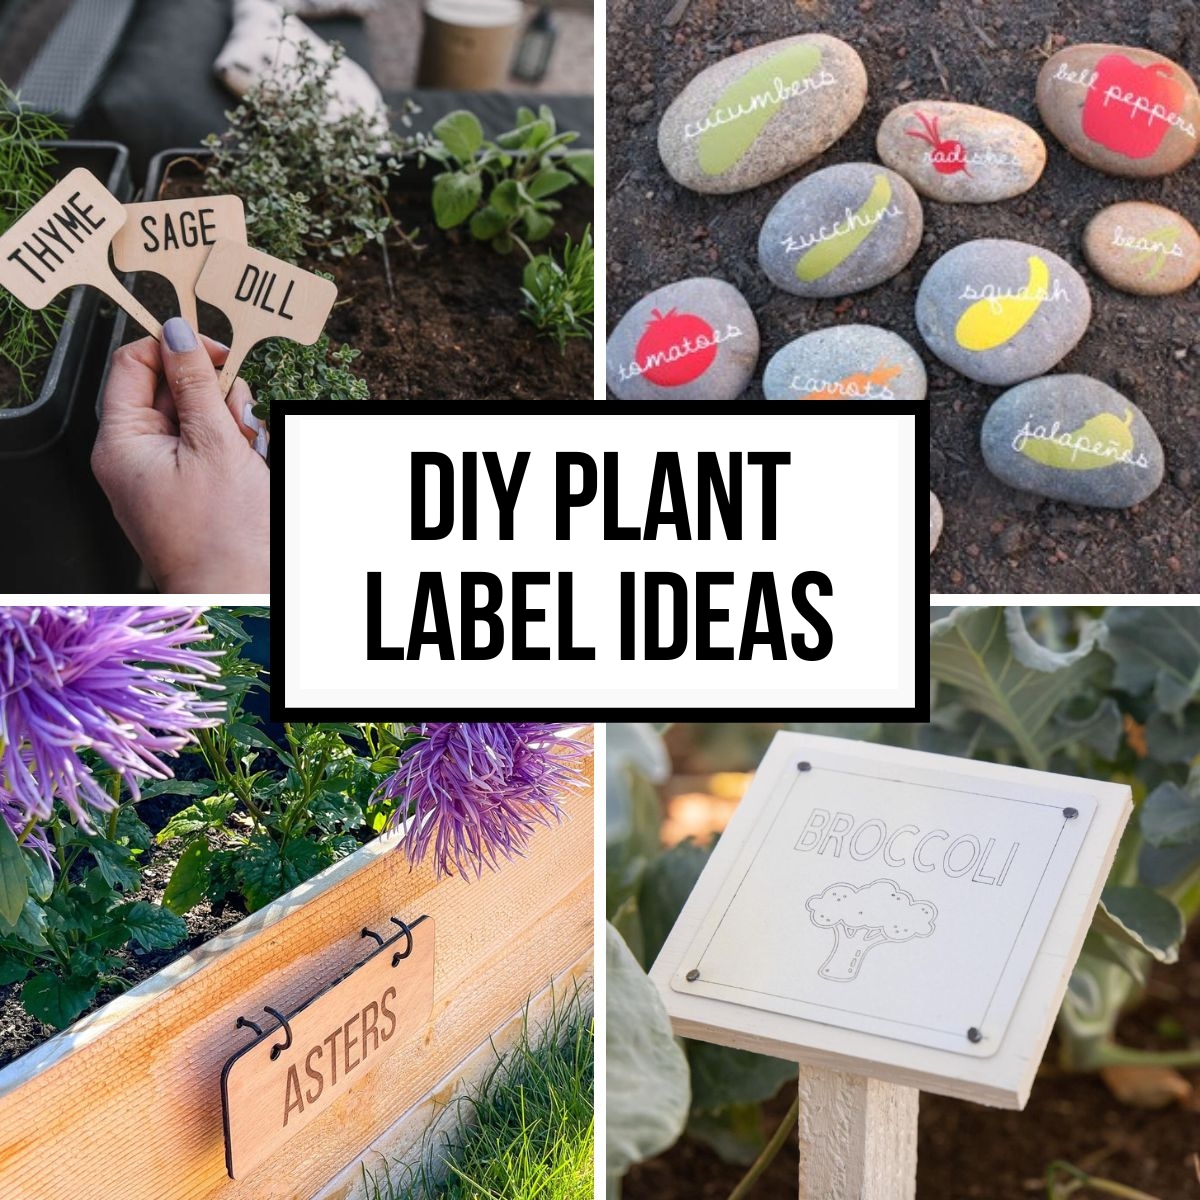 DIY plant label ideas with collage